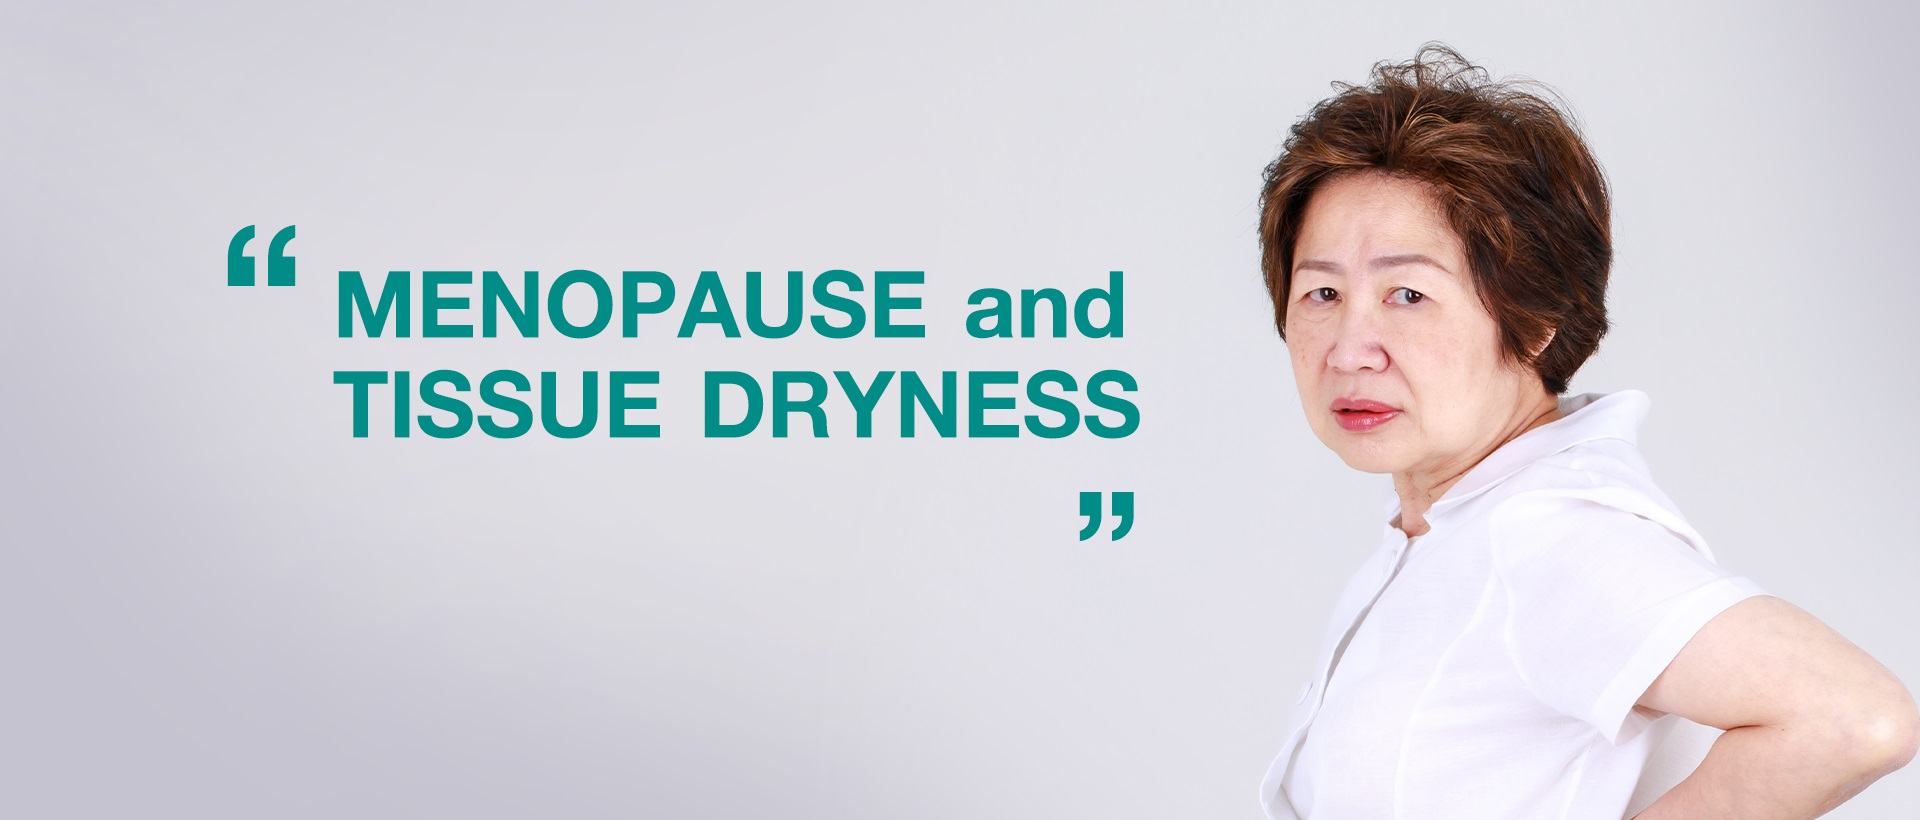 Menopause and tissue dryness